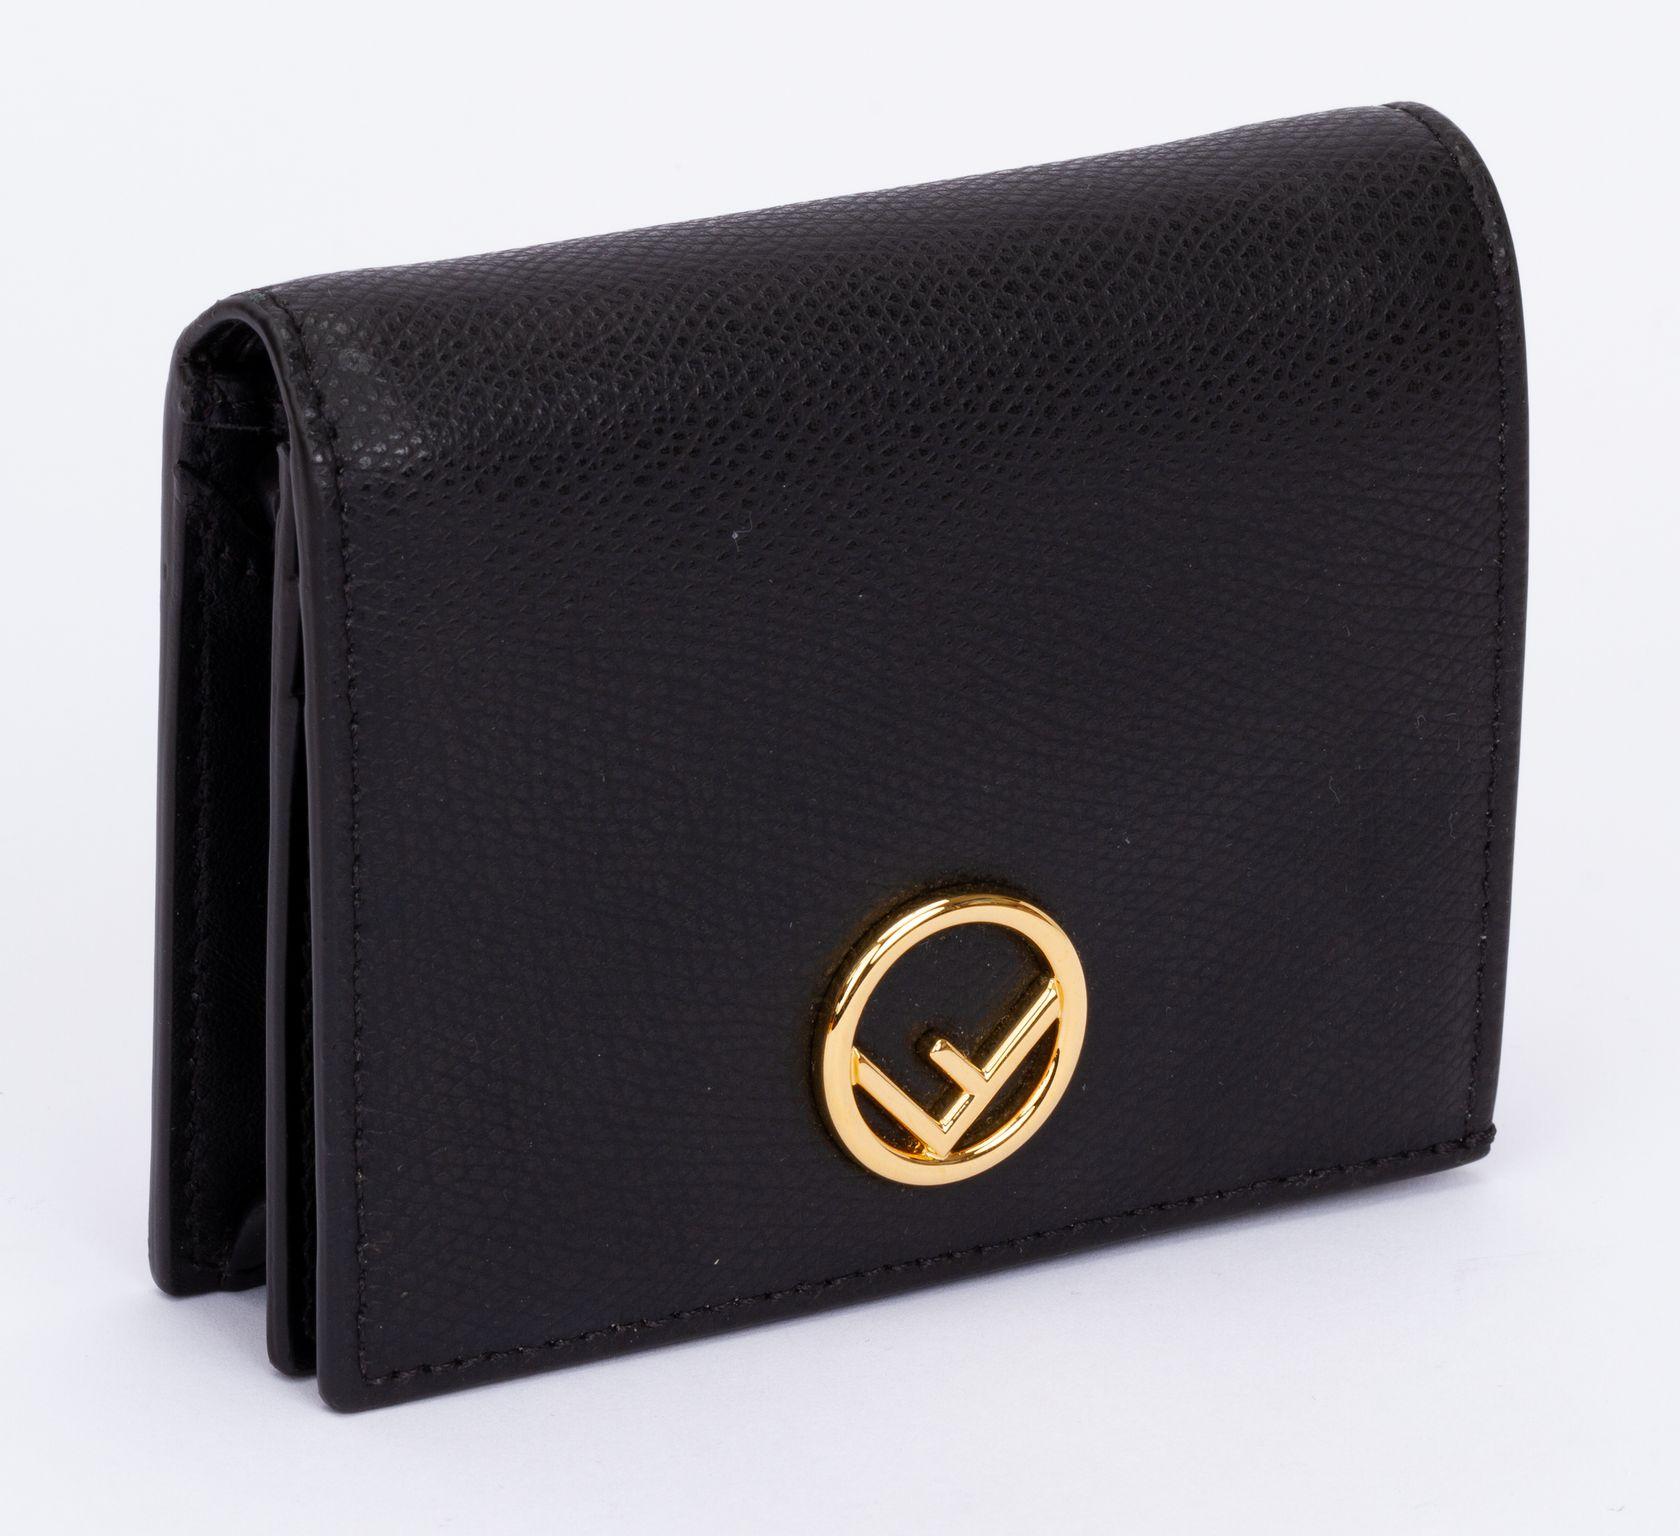 Fendi wallet made of leather in black. The wallet has several compartments for money and cards. On the front the clasp is a circle in the center is an F. The wallet is brand new and comes with the tag, original box and dust cover.